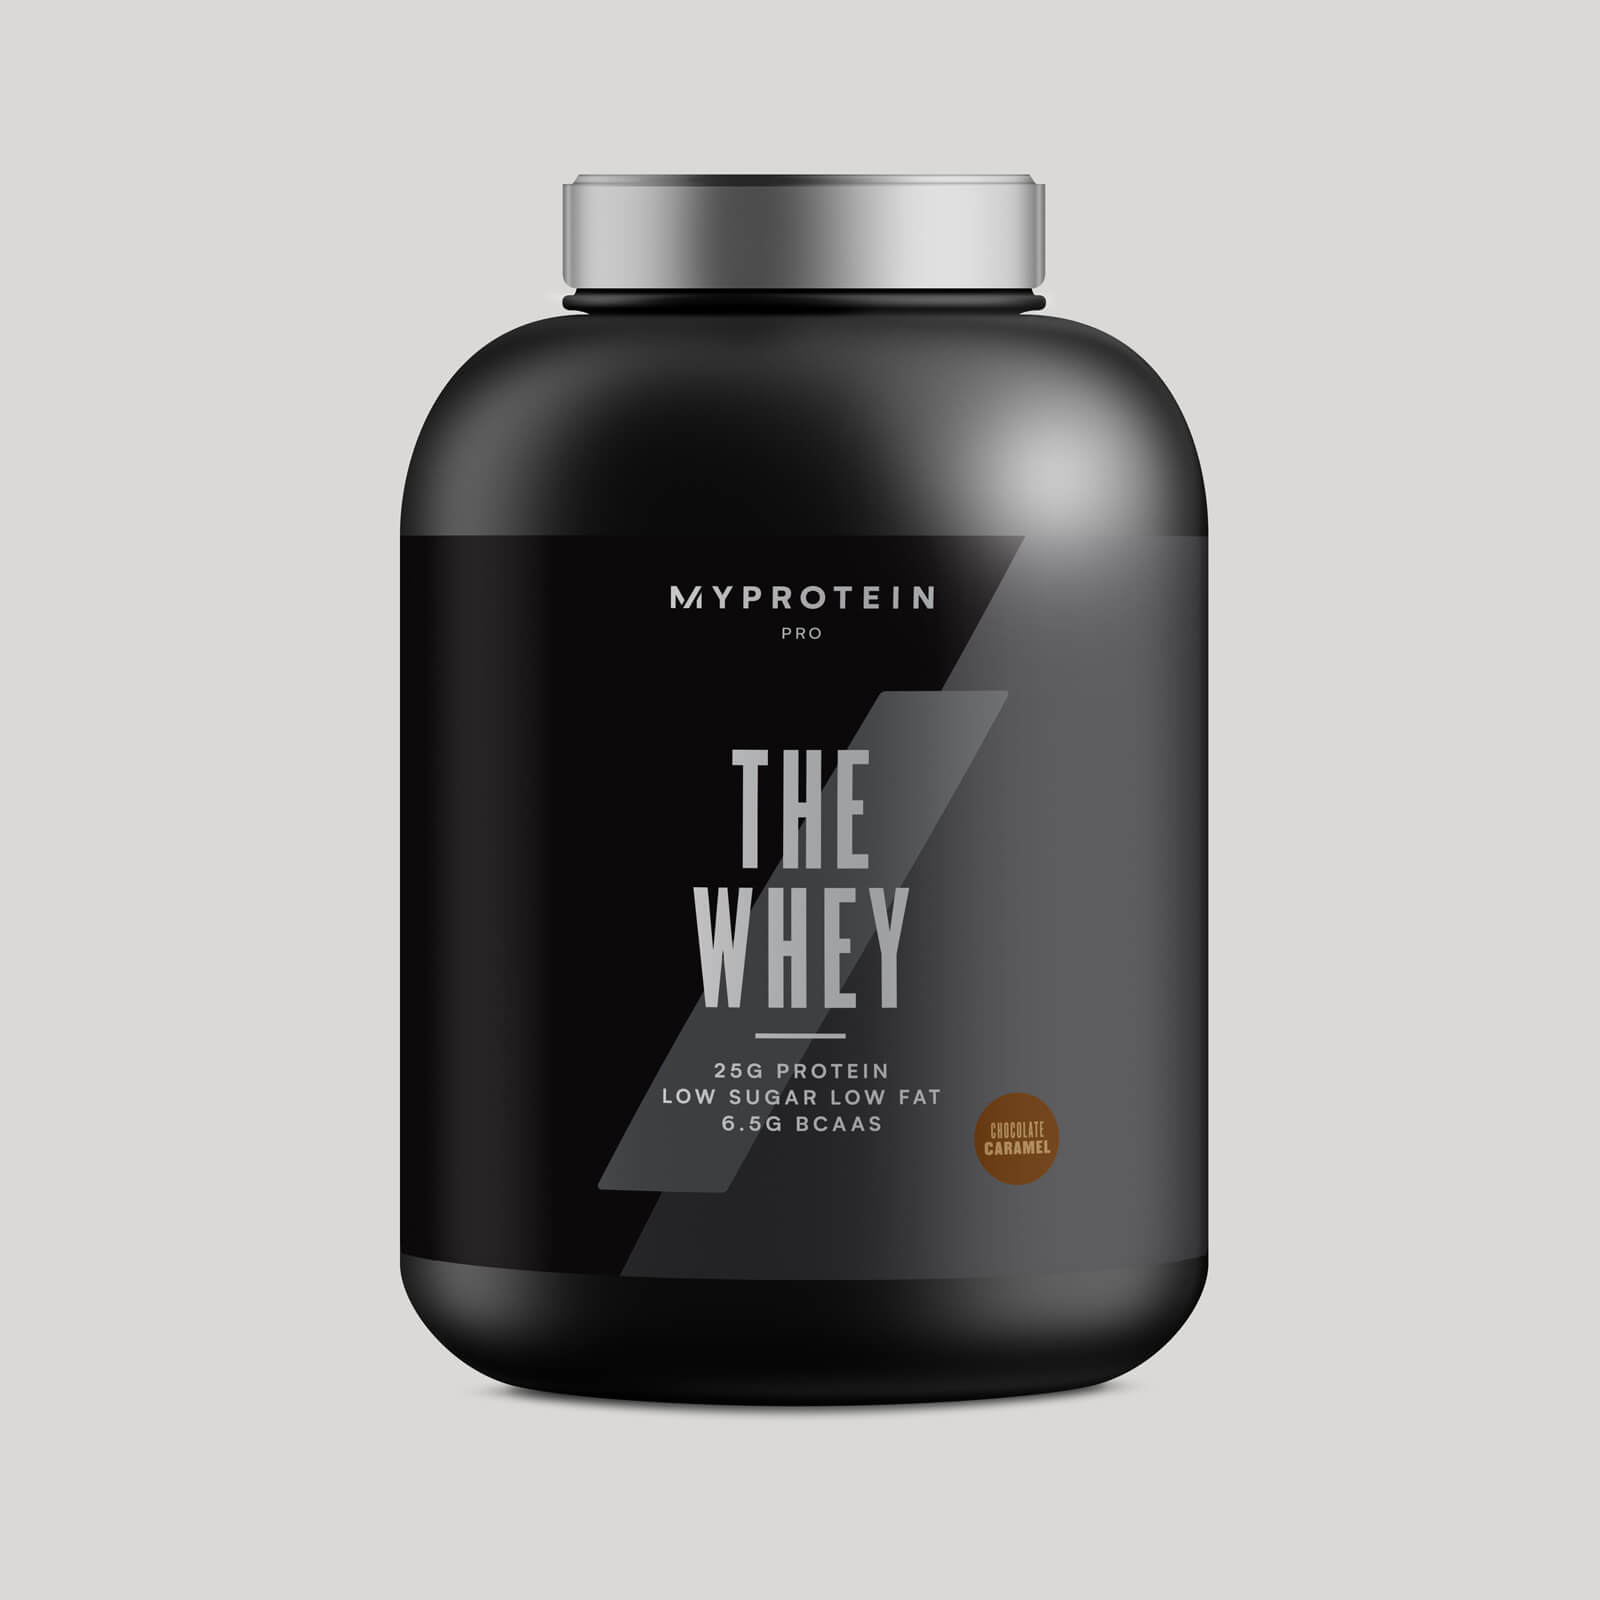 Myprotein THE Whey™ - 60 Servings - 1.8kg - Choklad Karamell